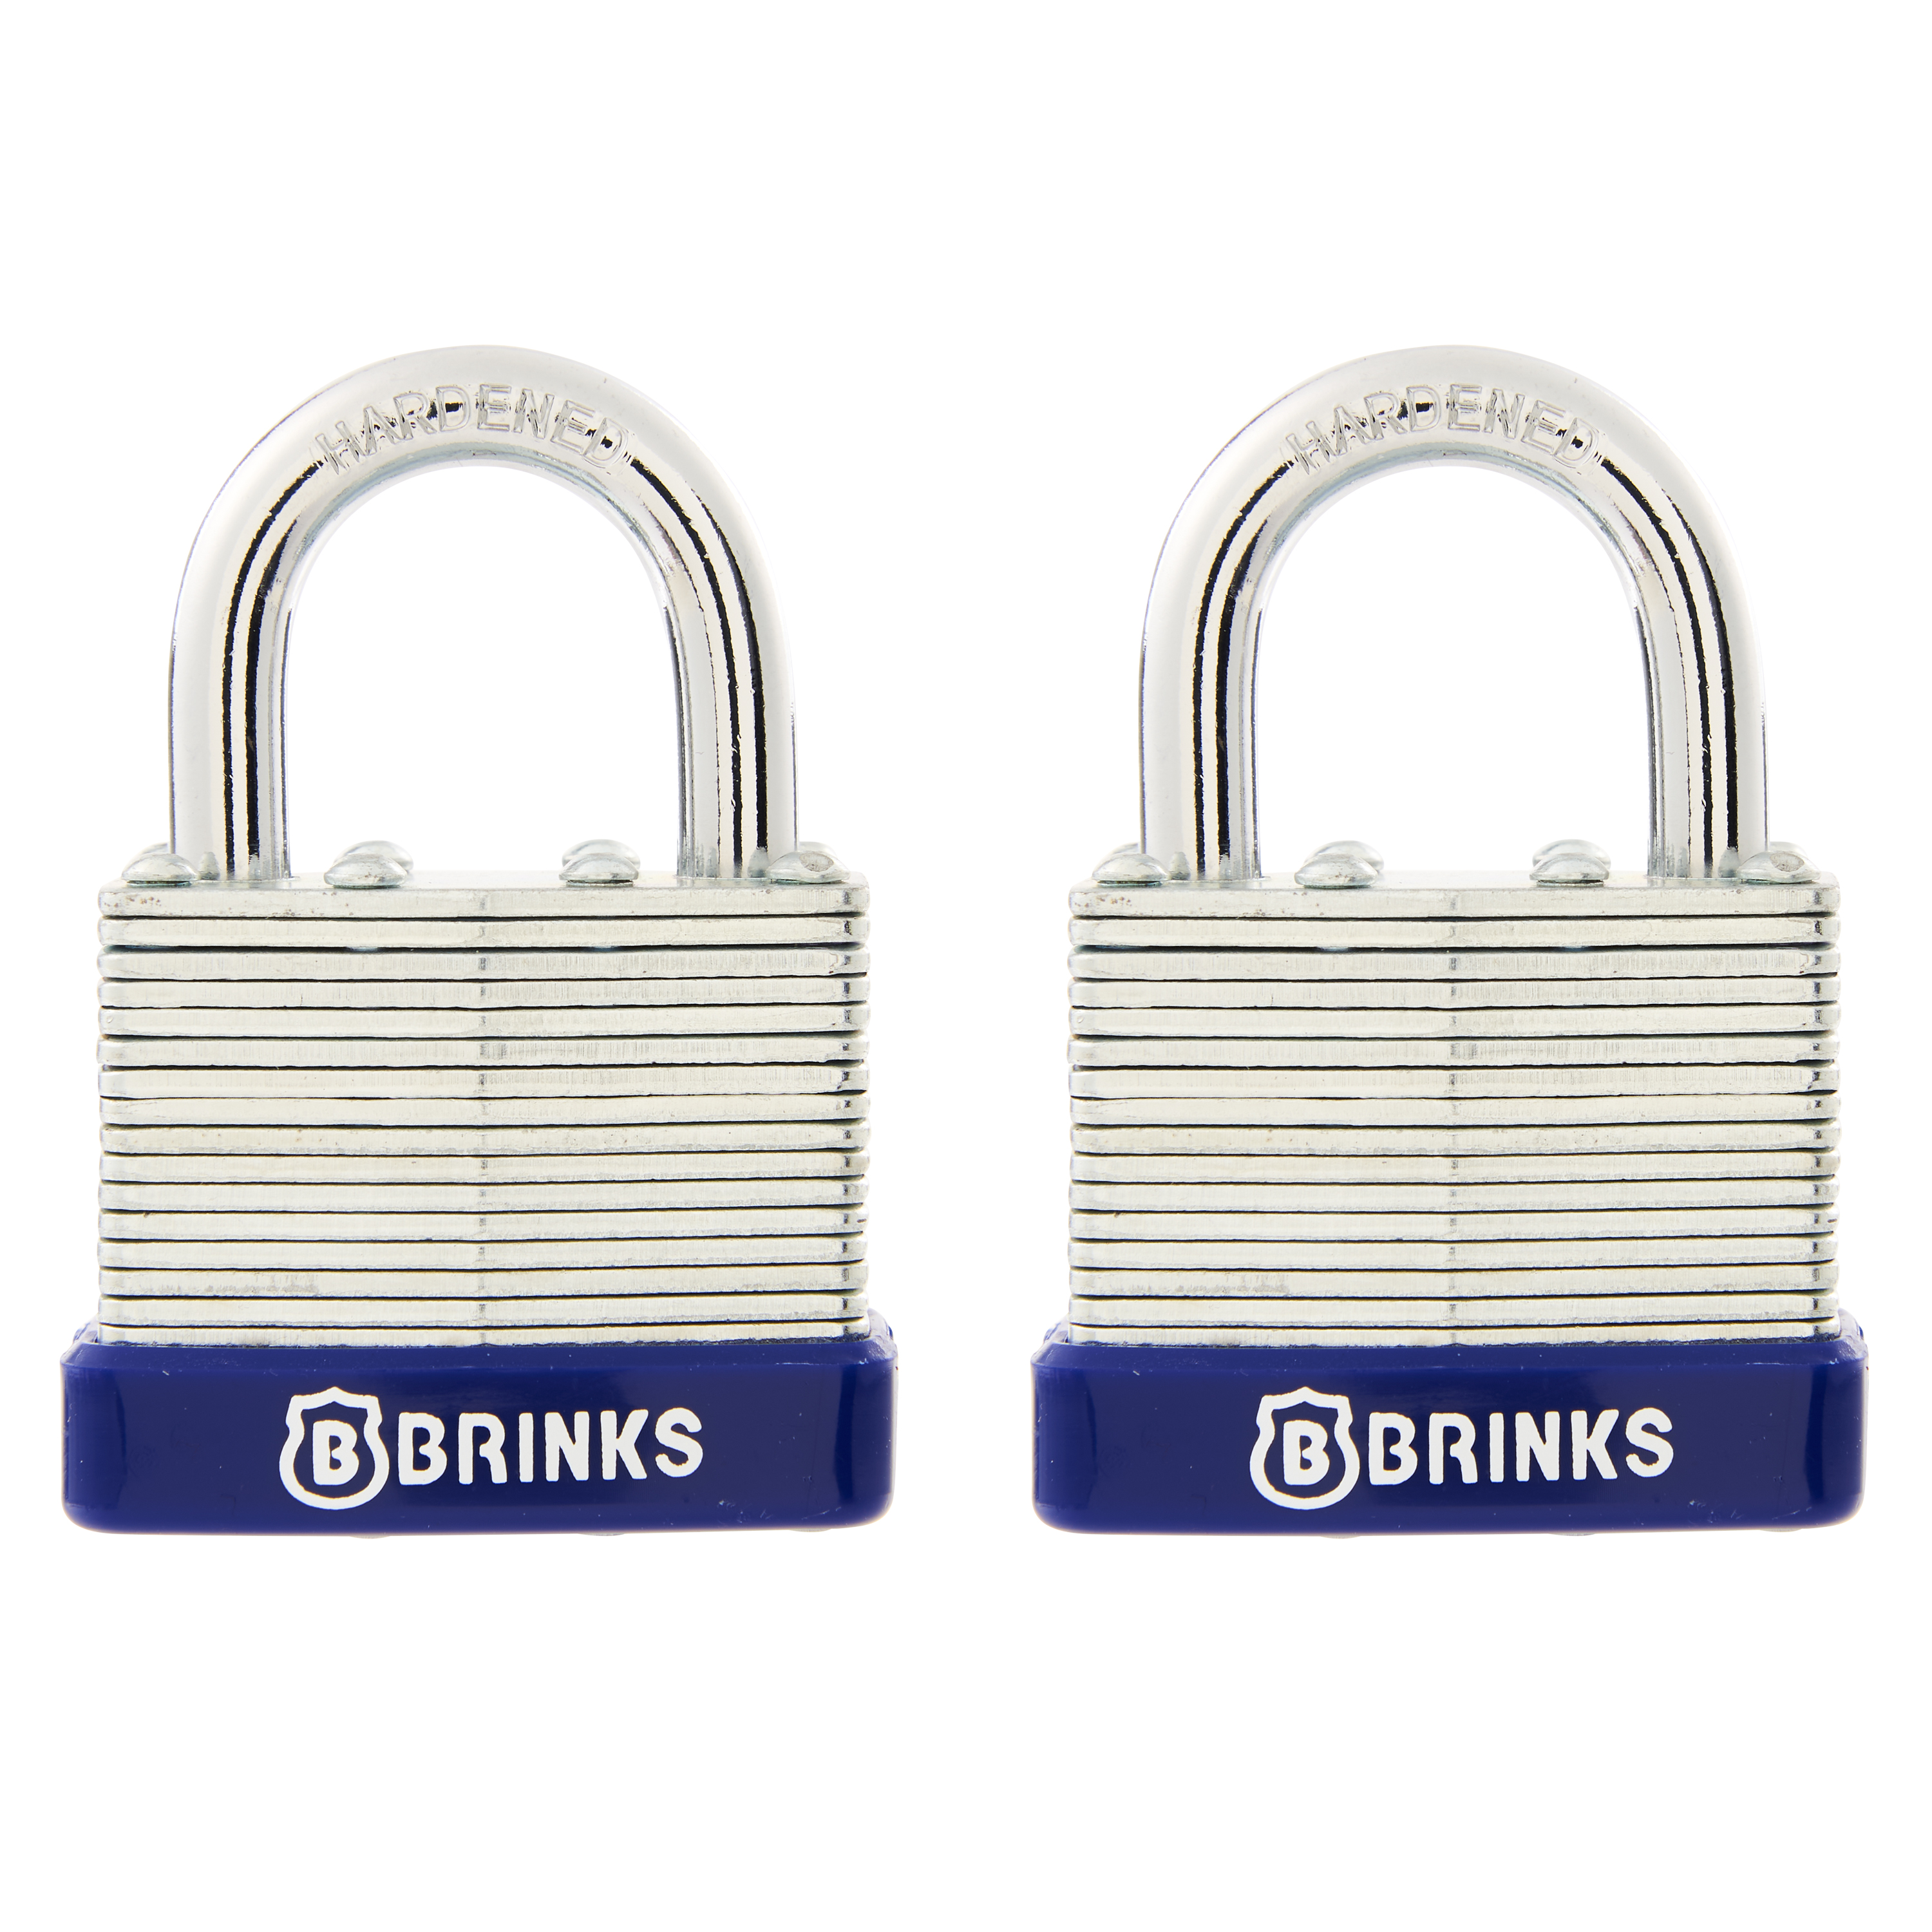 Brinks Laminated Steel 40mm Keyed Padlock with 7/8in Shackle, 2 Pack - image 1 of 9